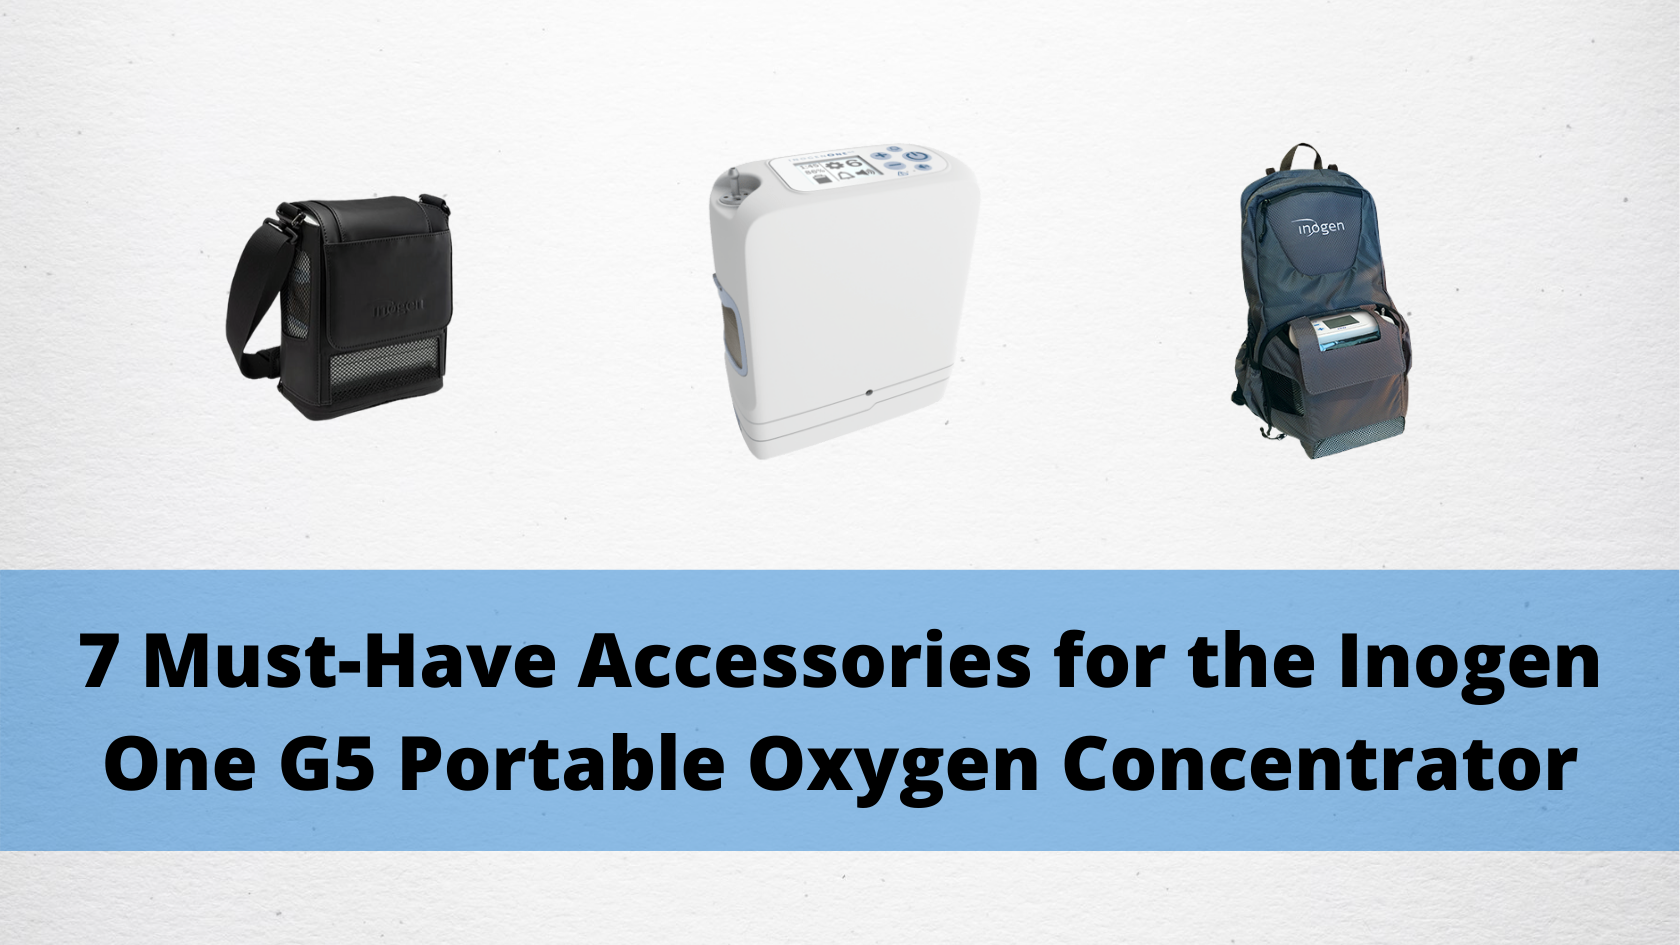 7 Must-Have Accessories for the Inogen One G5 Portable Oxygen Concentrator